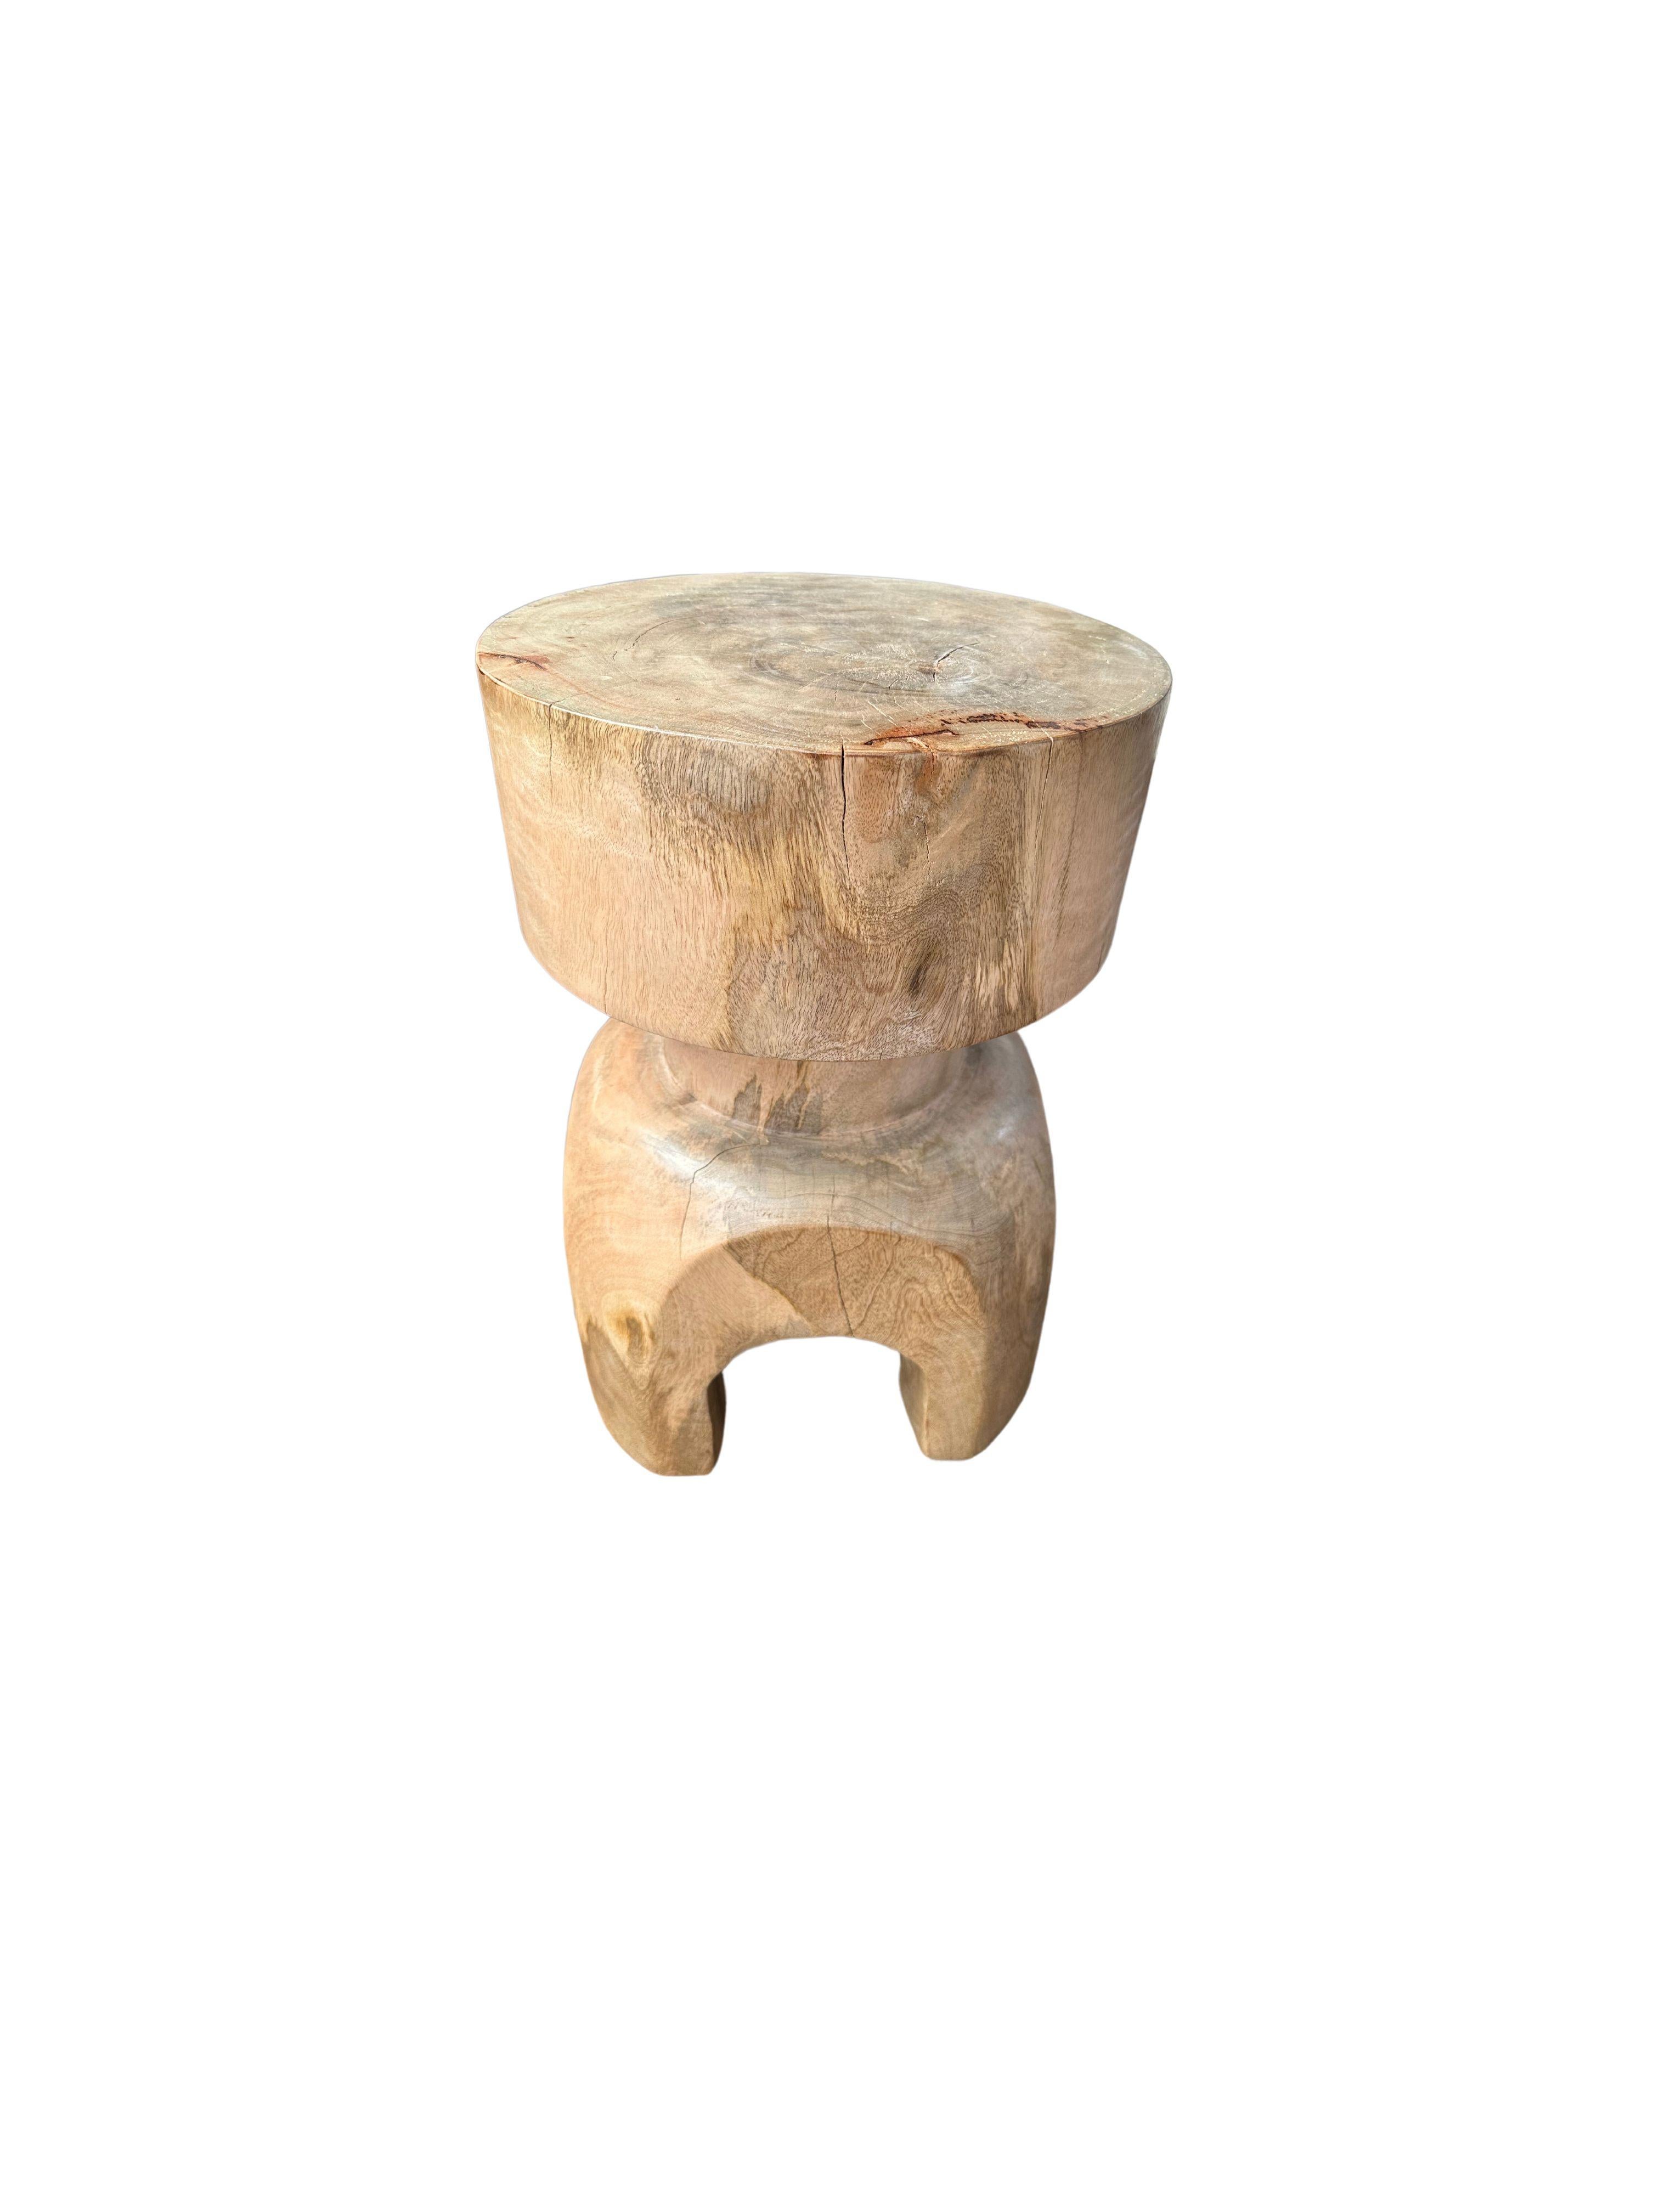 A wonderfully sculptural round side table. Its neutral pigment and subtle wood texture makes it perfect for any space. This table was crafted from solid mango wood and features a natural finish where the wood was sanded and smoothed. 

